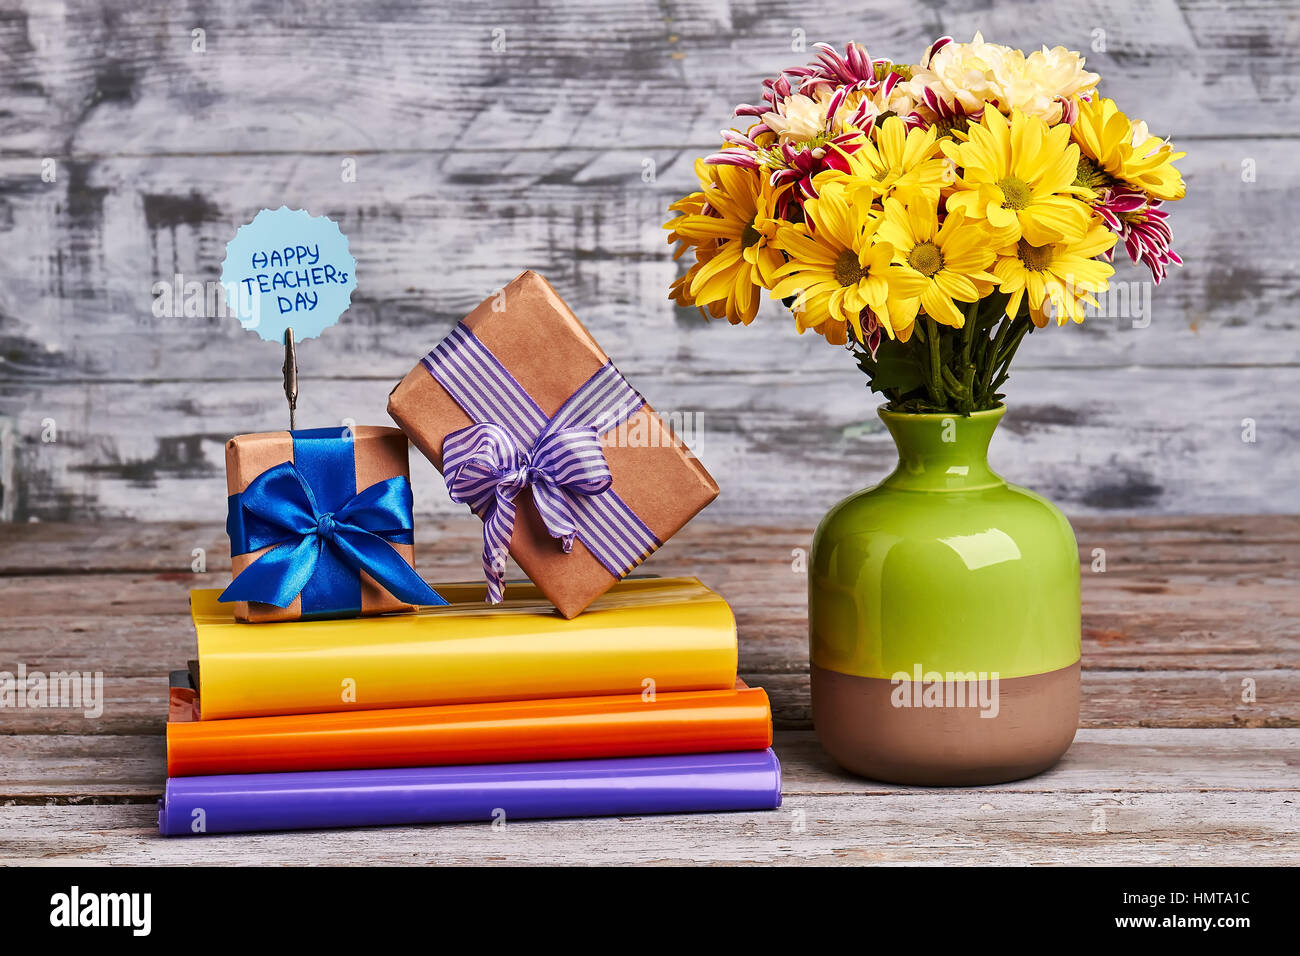 Books, flowers and gift boxes. Colourful books on wooden background. Stock Photo